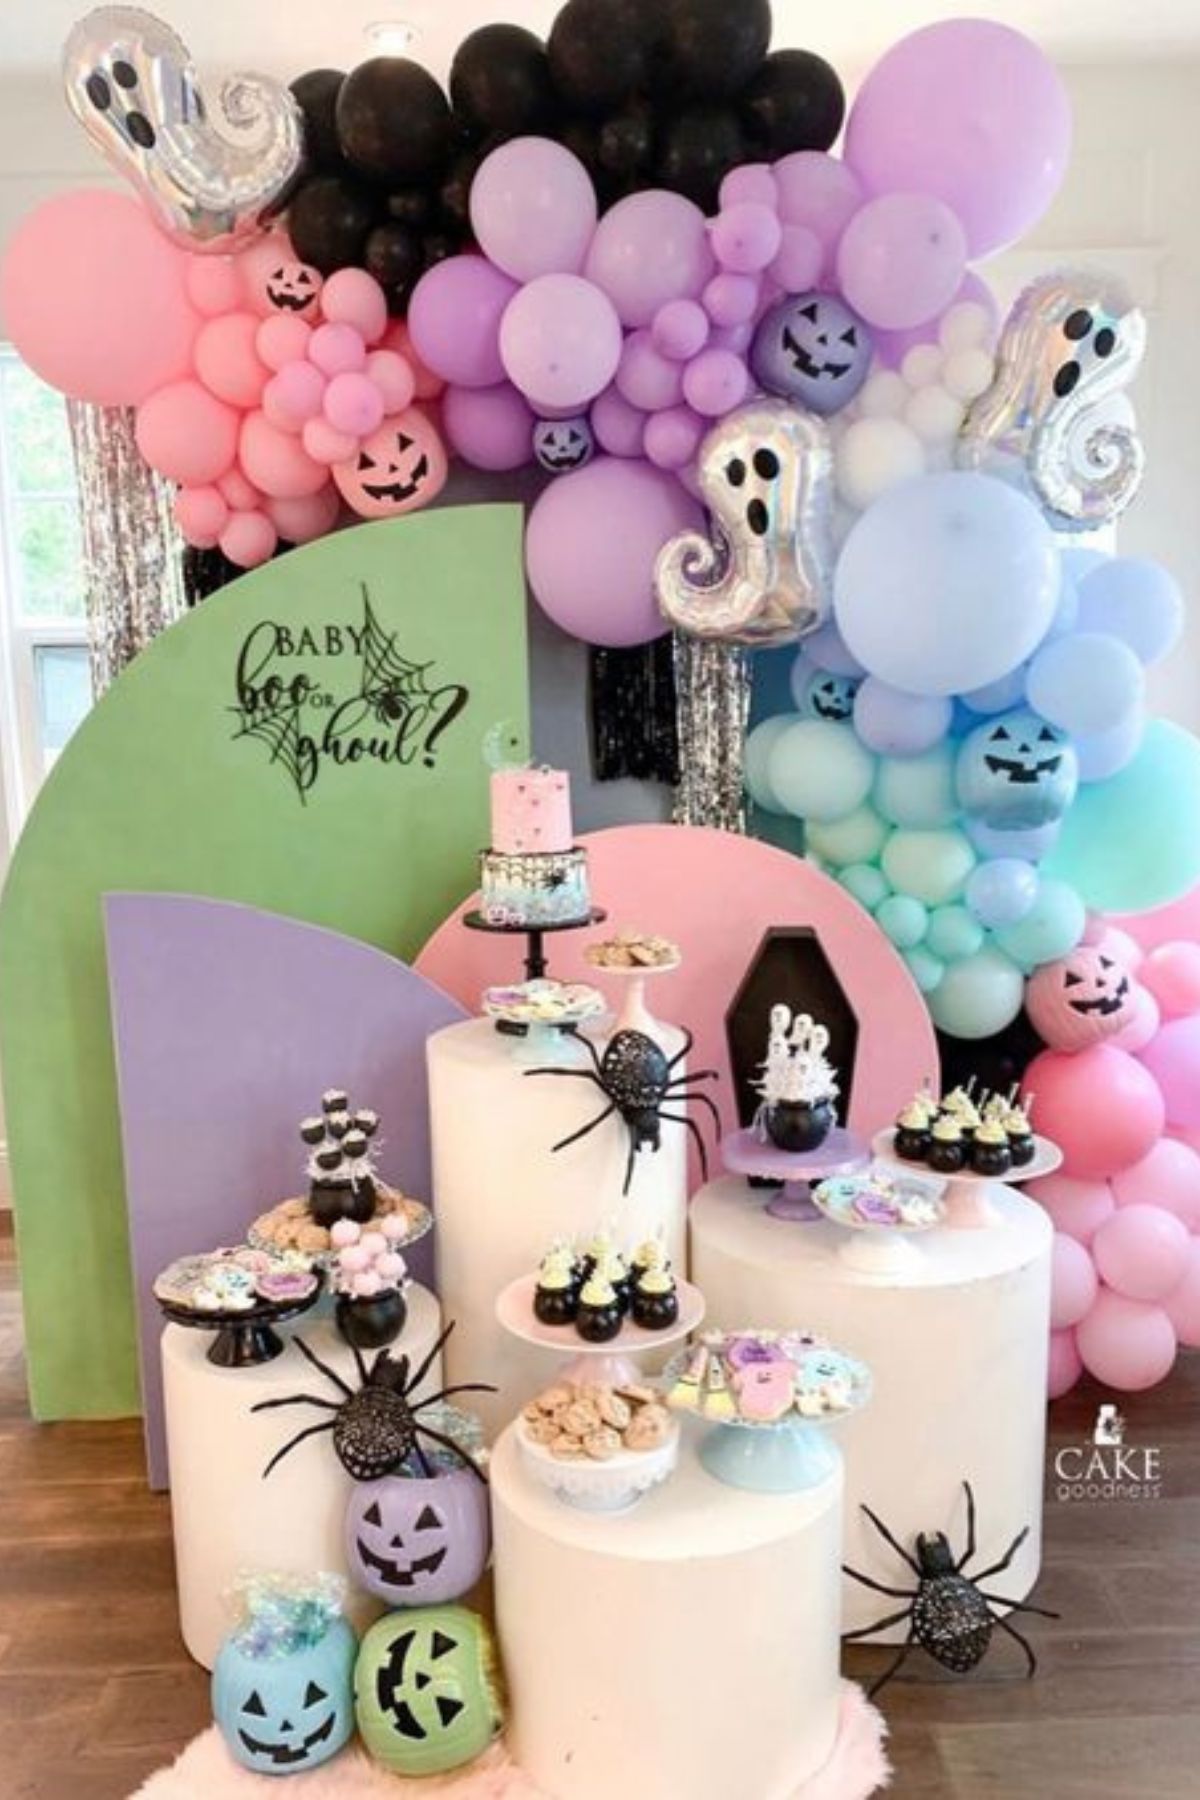 A Halloween gender reveal backdrop with pink, purple, and blue balloons and spooky decorations.